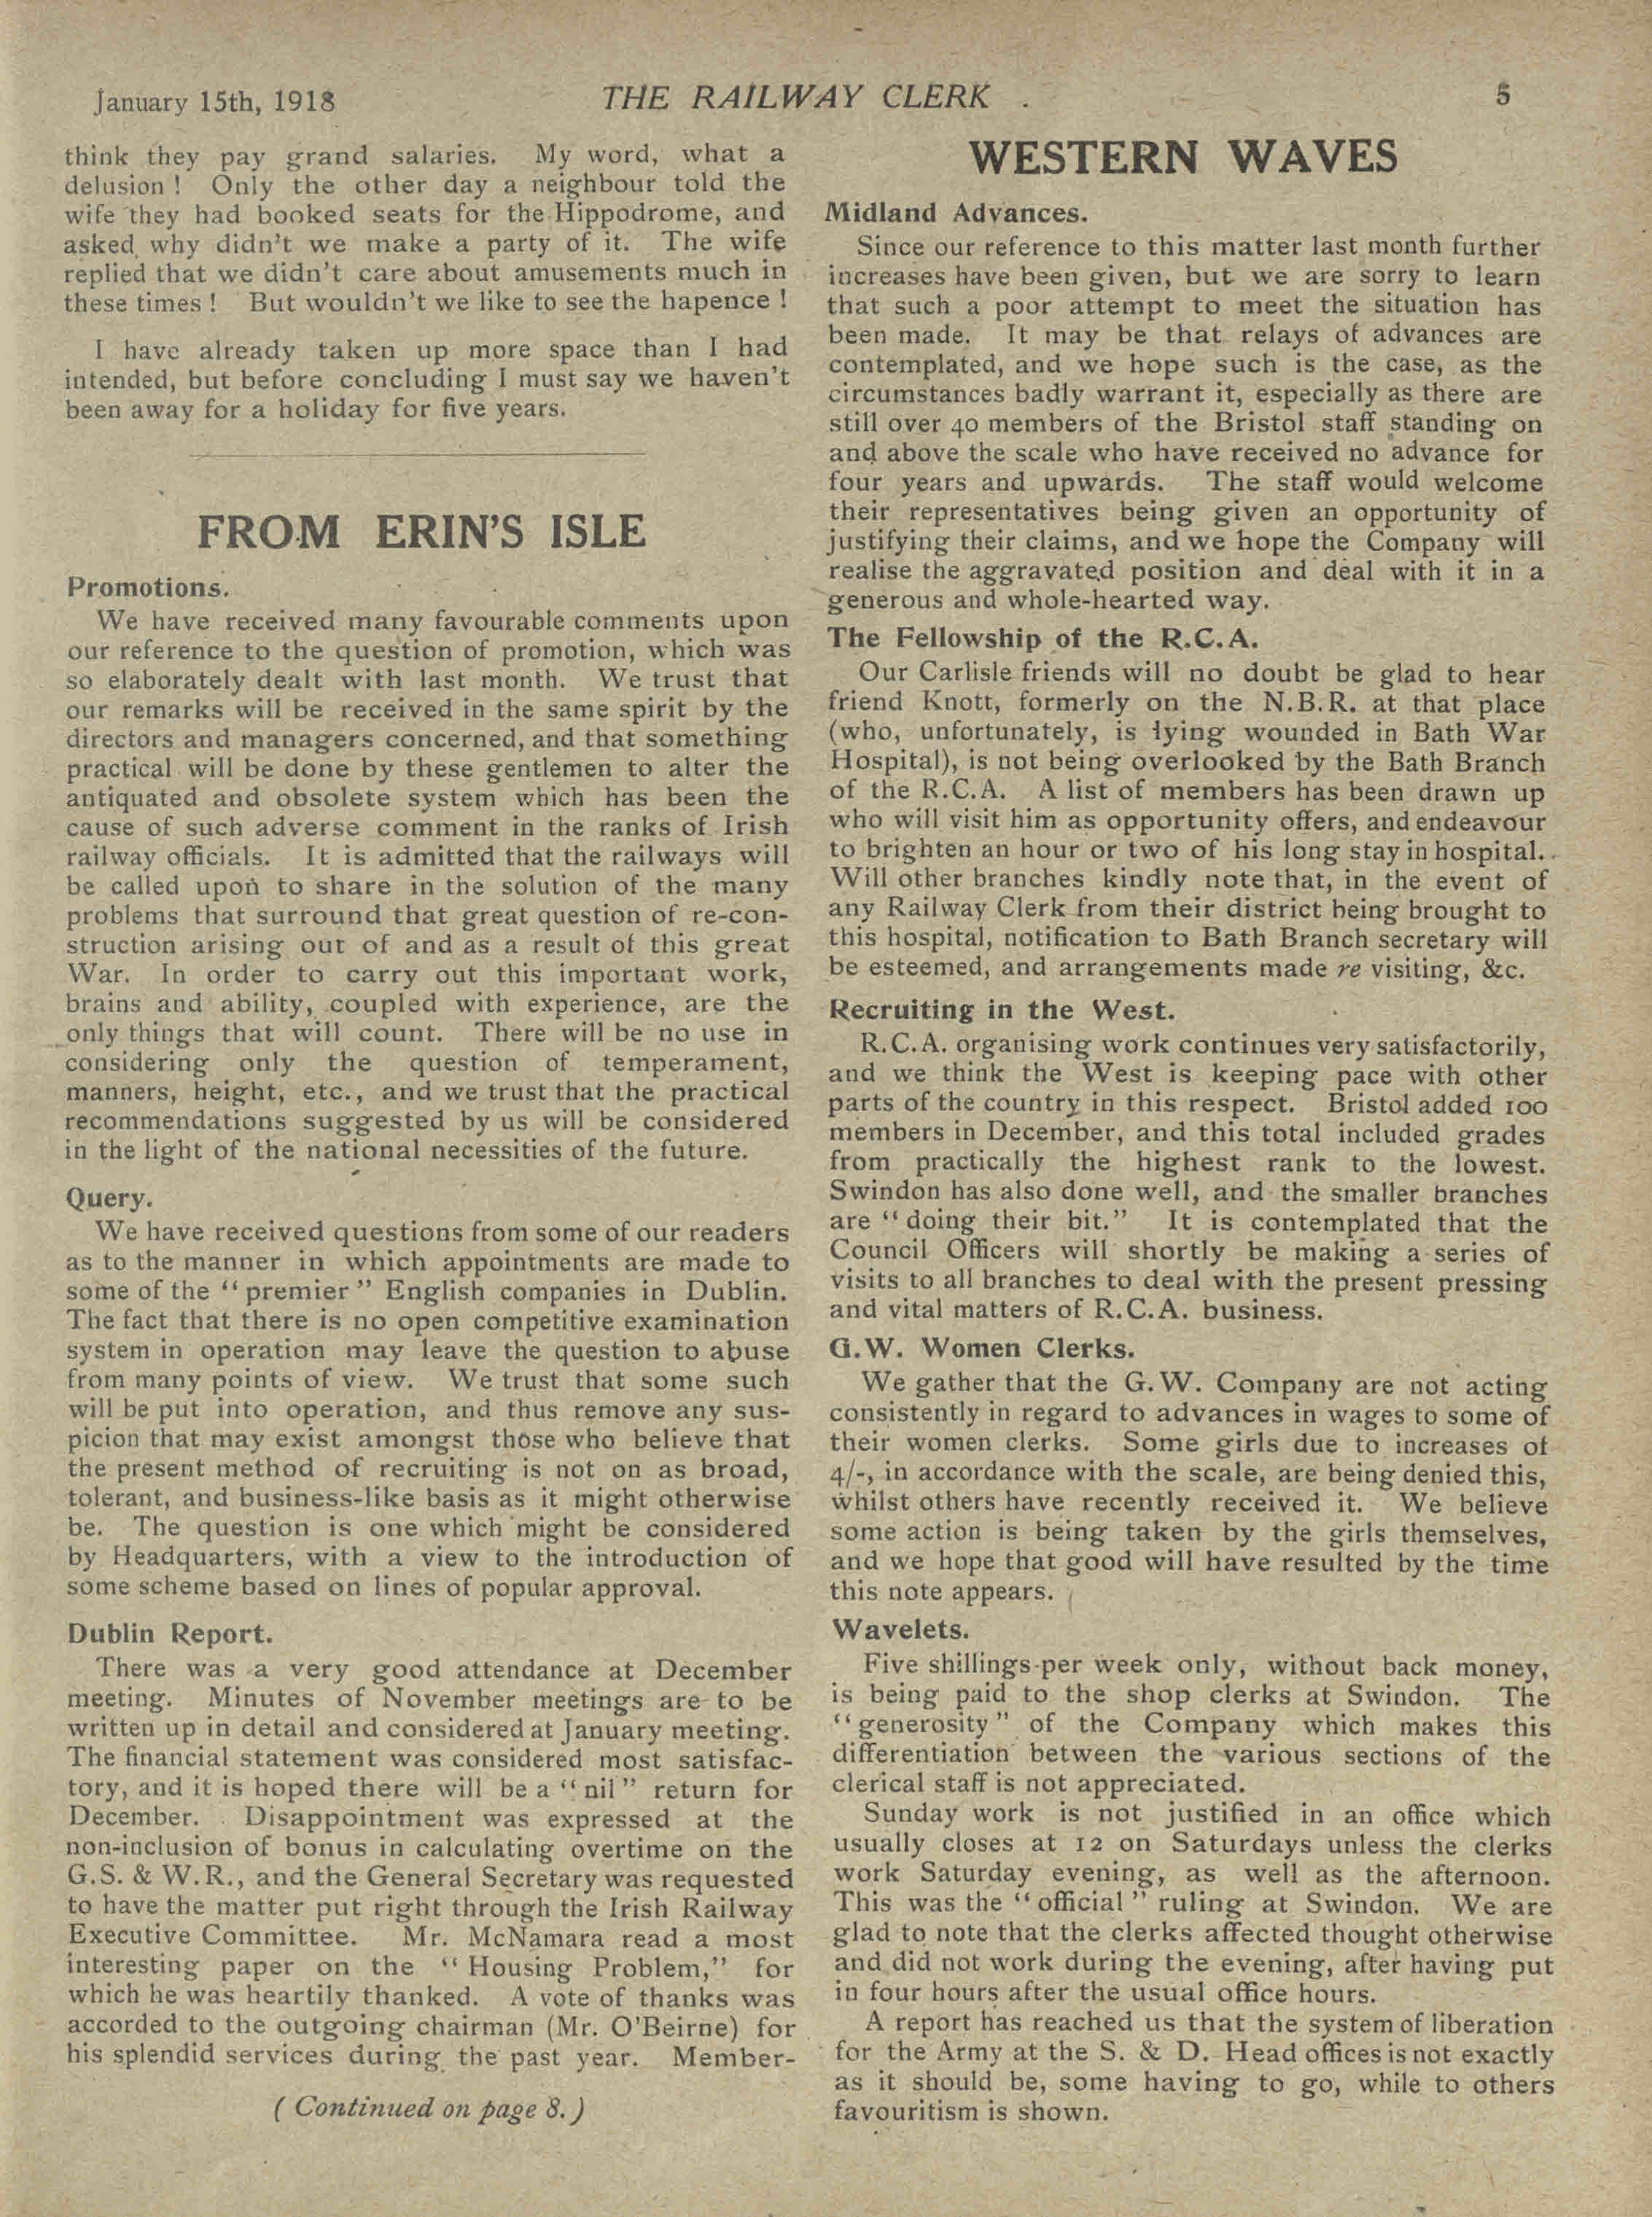 Page from The Railway Clerk, 15 January 1918, including the end of an article called "How much is £1 worth to-day?"